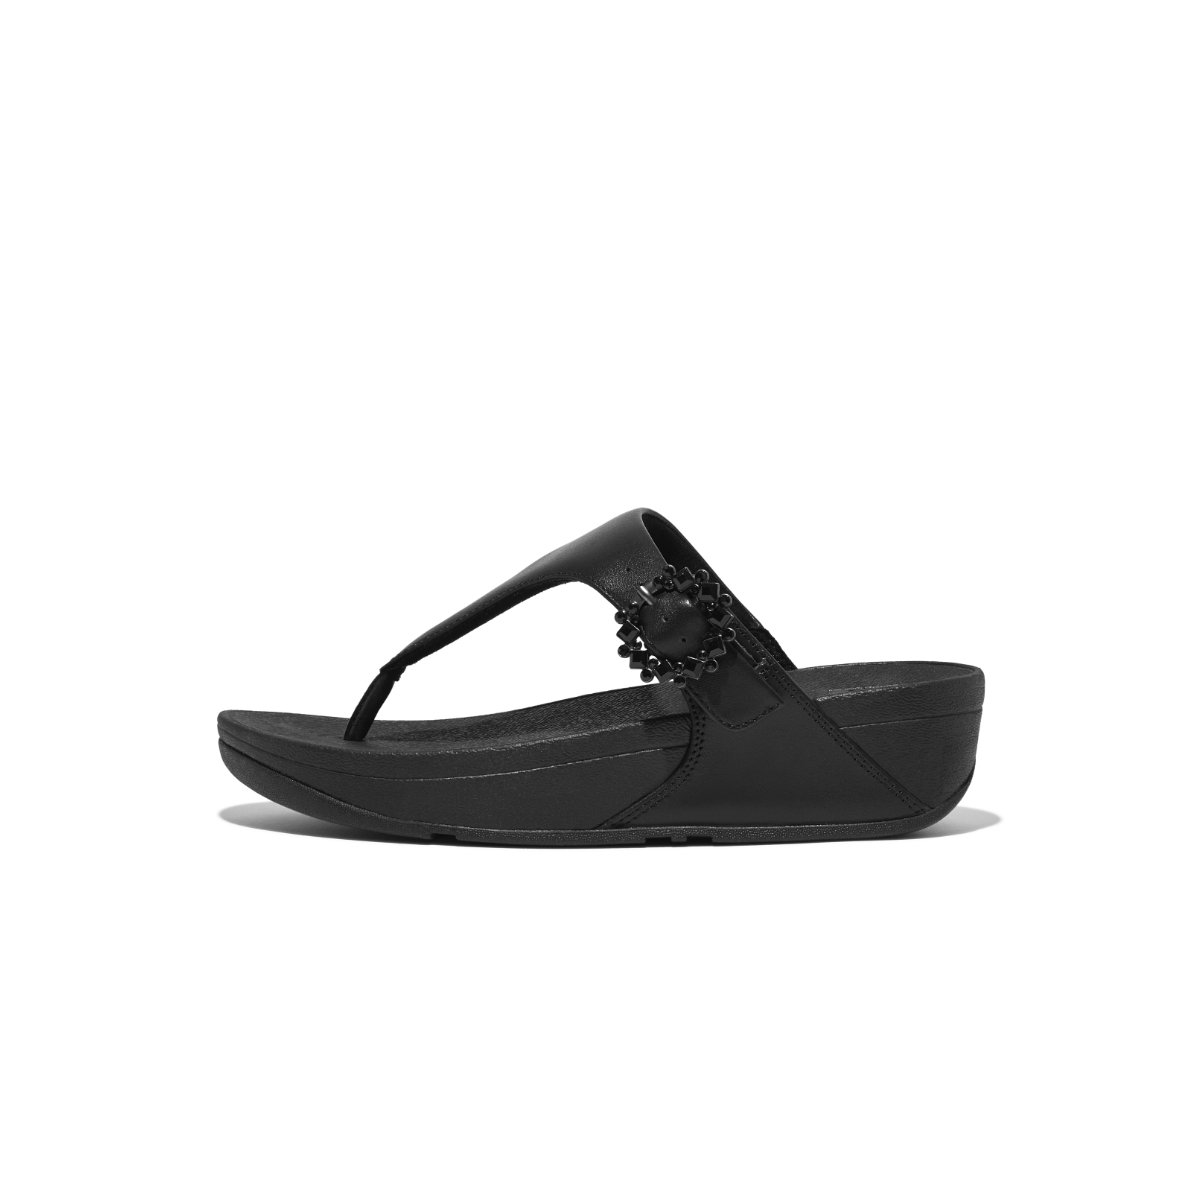 FitFlop LULU Crystal-Buckle Leather Toe-Post Sandals All Black front view 